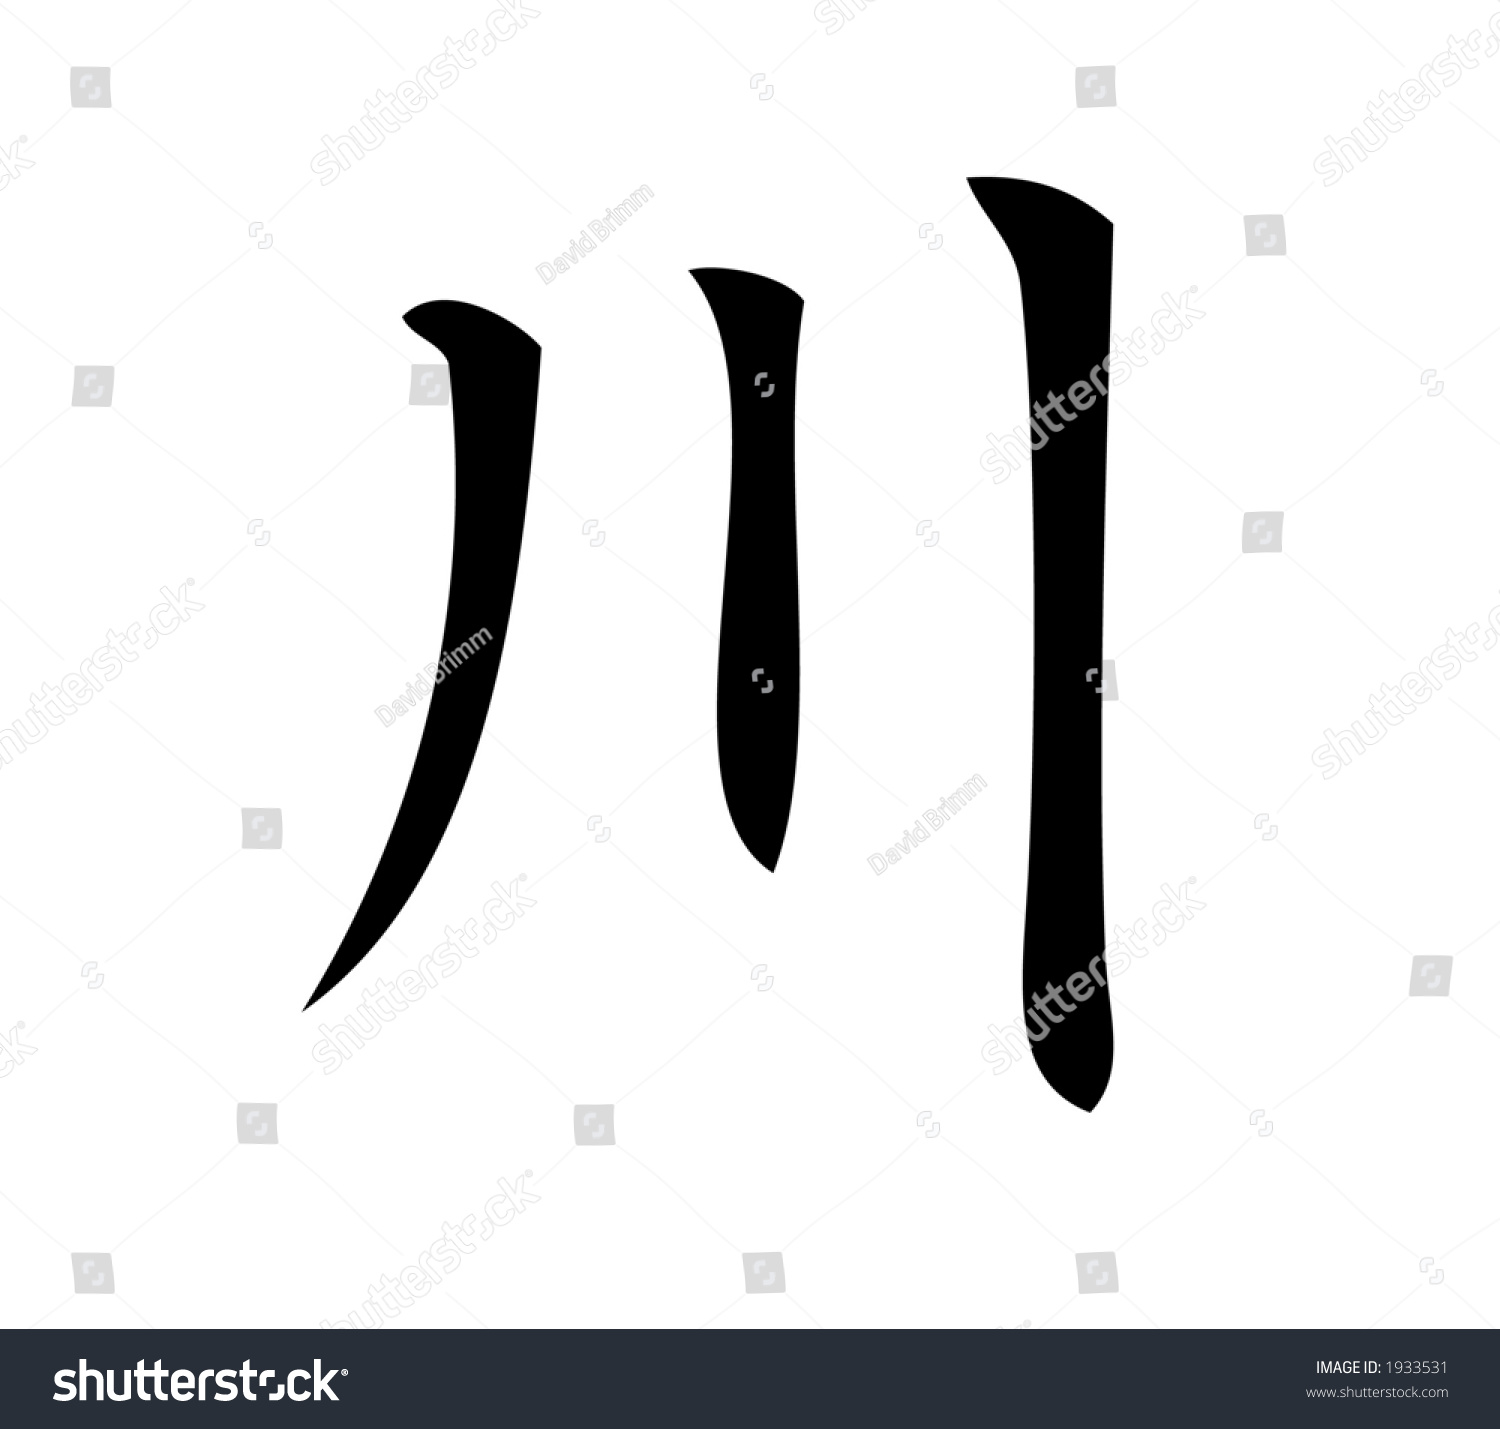 Kanji Character For River. Kanji, One Of Three Scripts Used In The ...